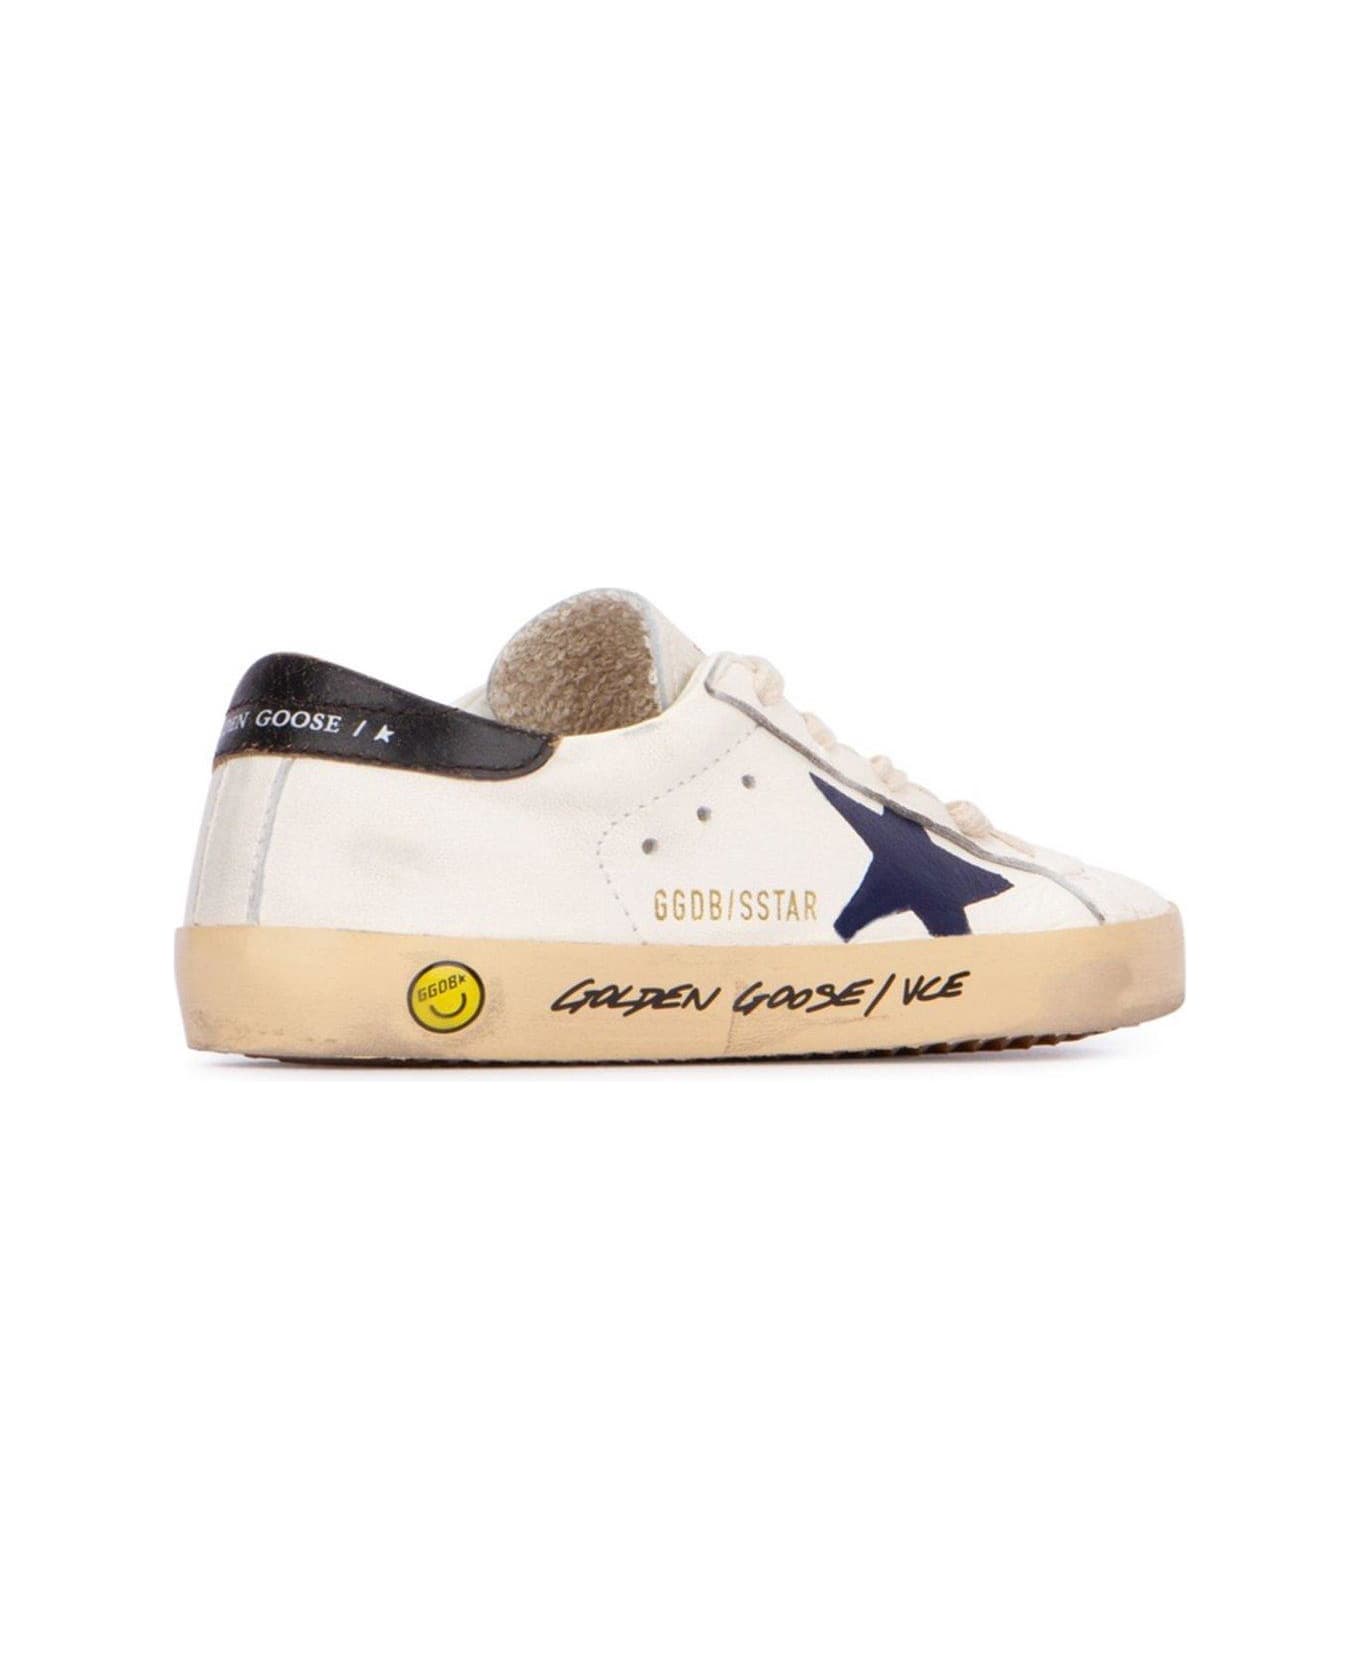 Golden Goose Superstar Lace-up Sneakers - White